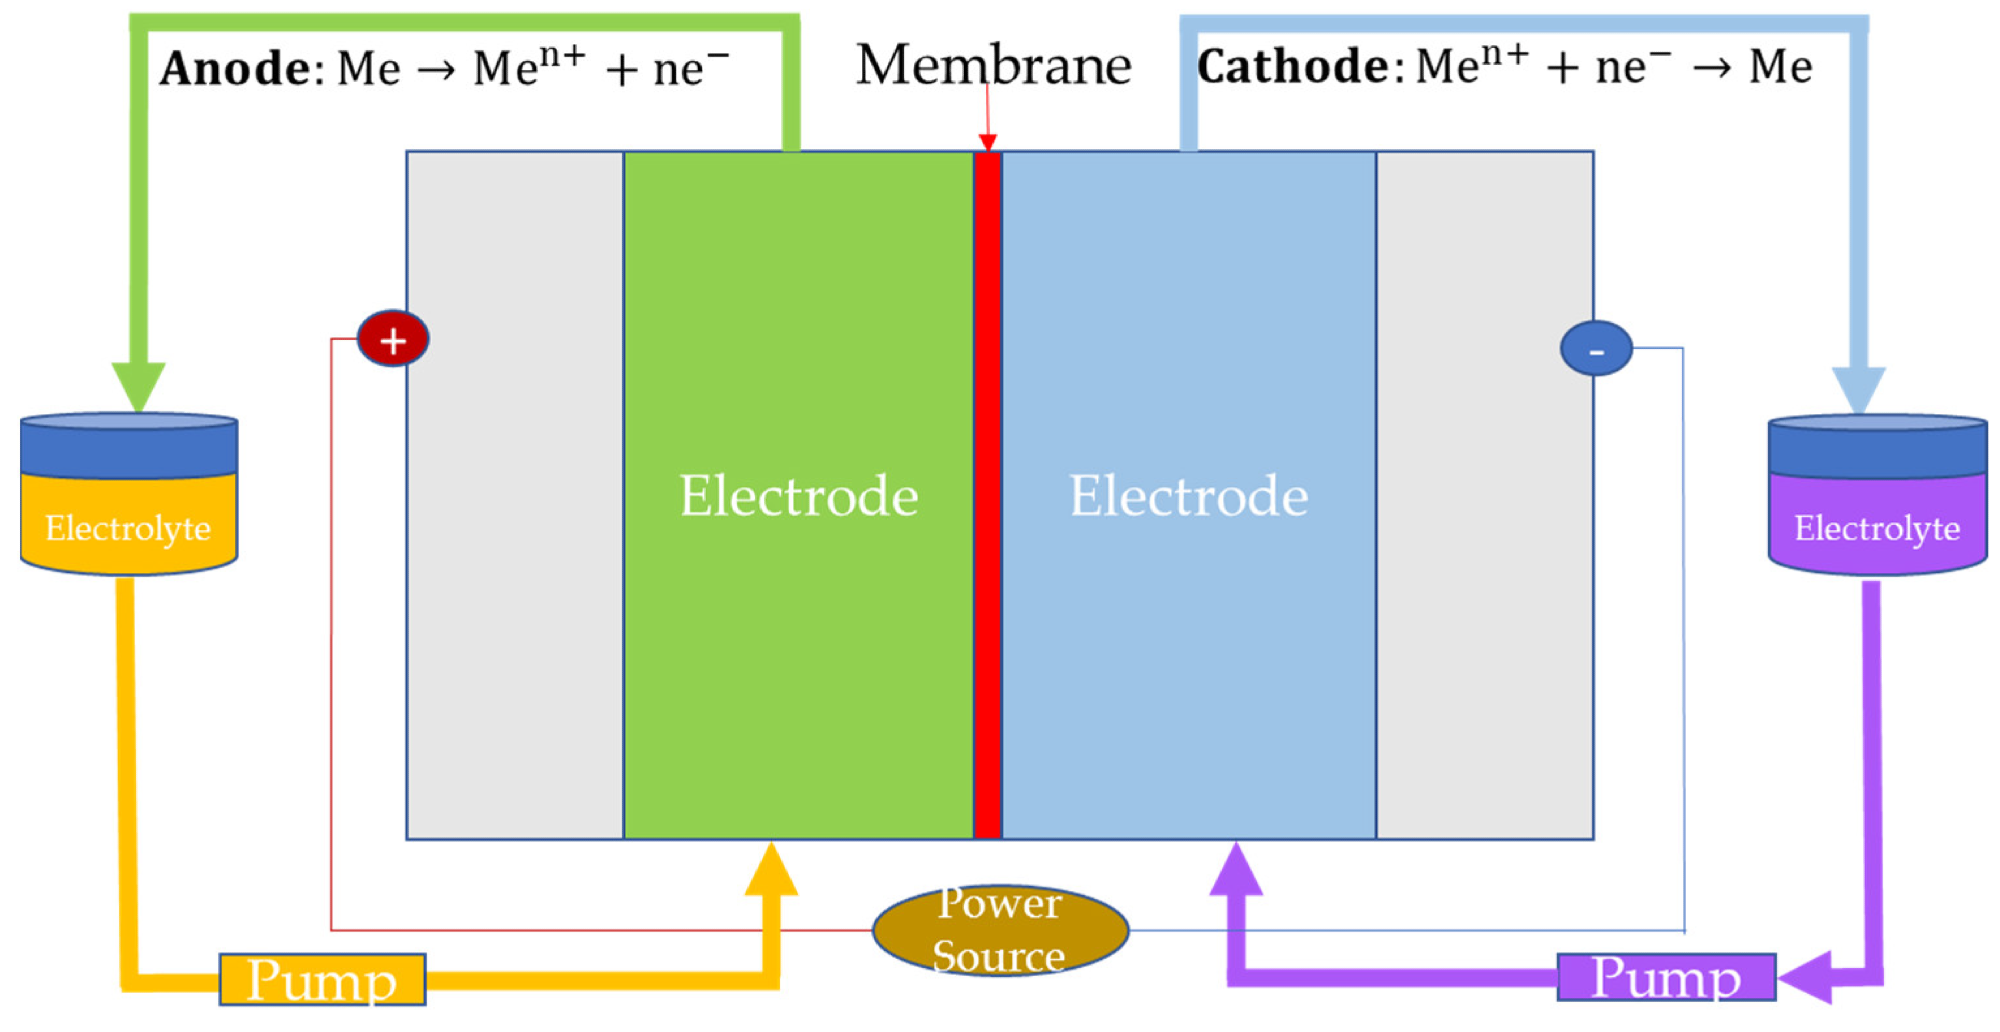 Cell configuration of redox flow batteries (“Me” refers to reactant dissolved in the electrolyte solution).